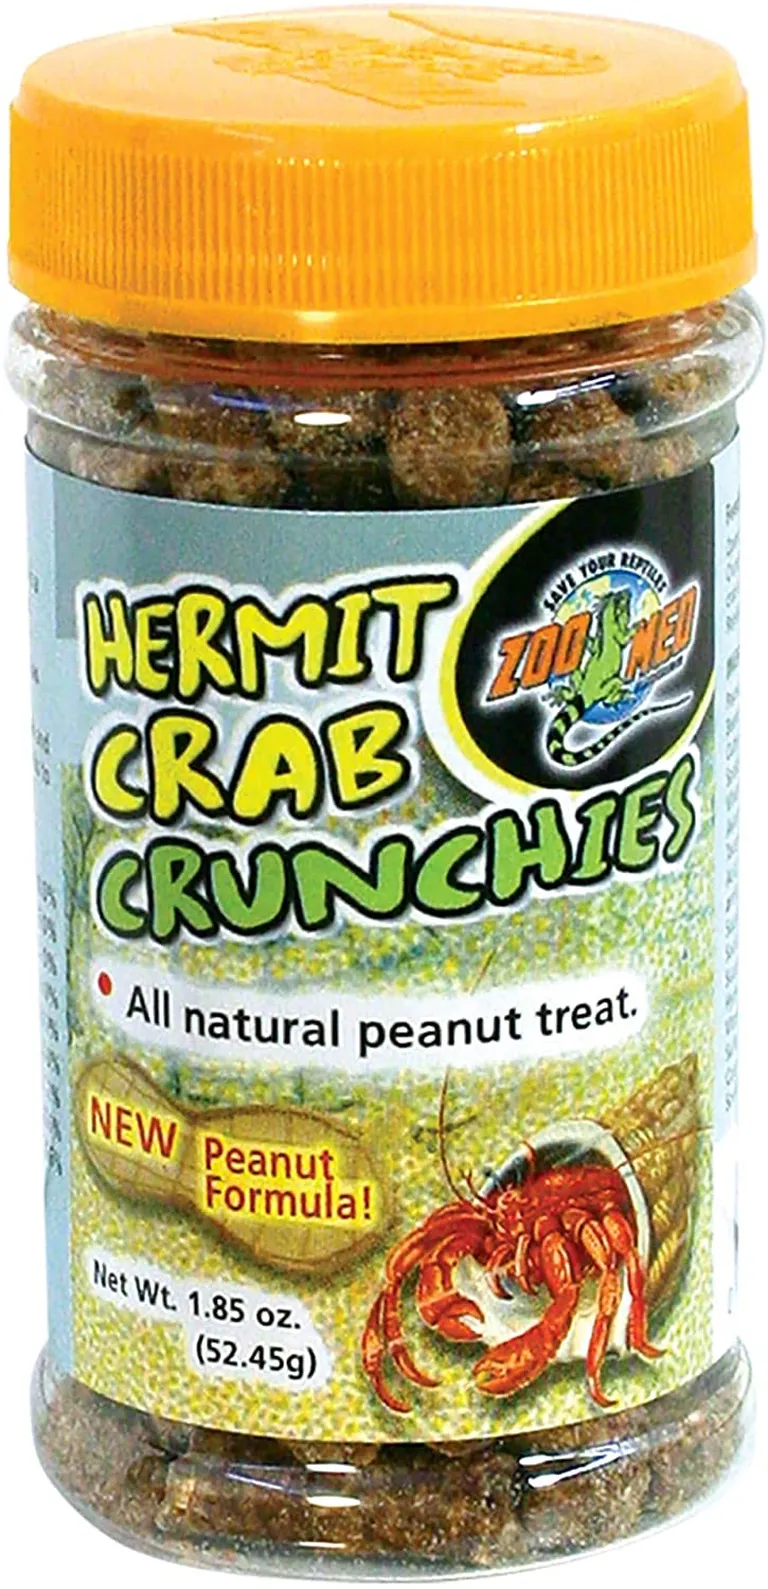 Zoo Med Hermit Crab Crunchies Natural Peanut Treat Photo 1